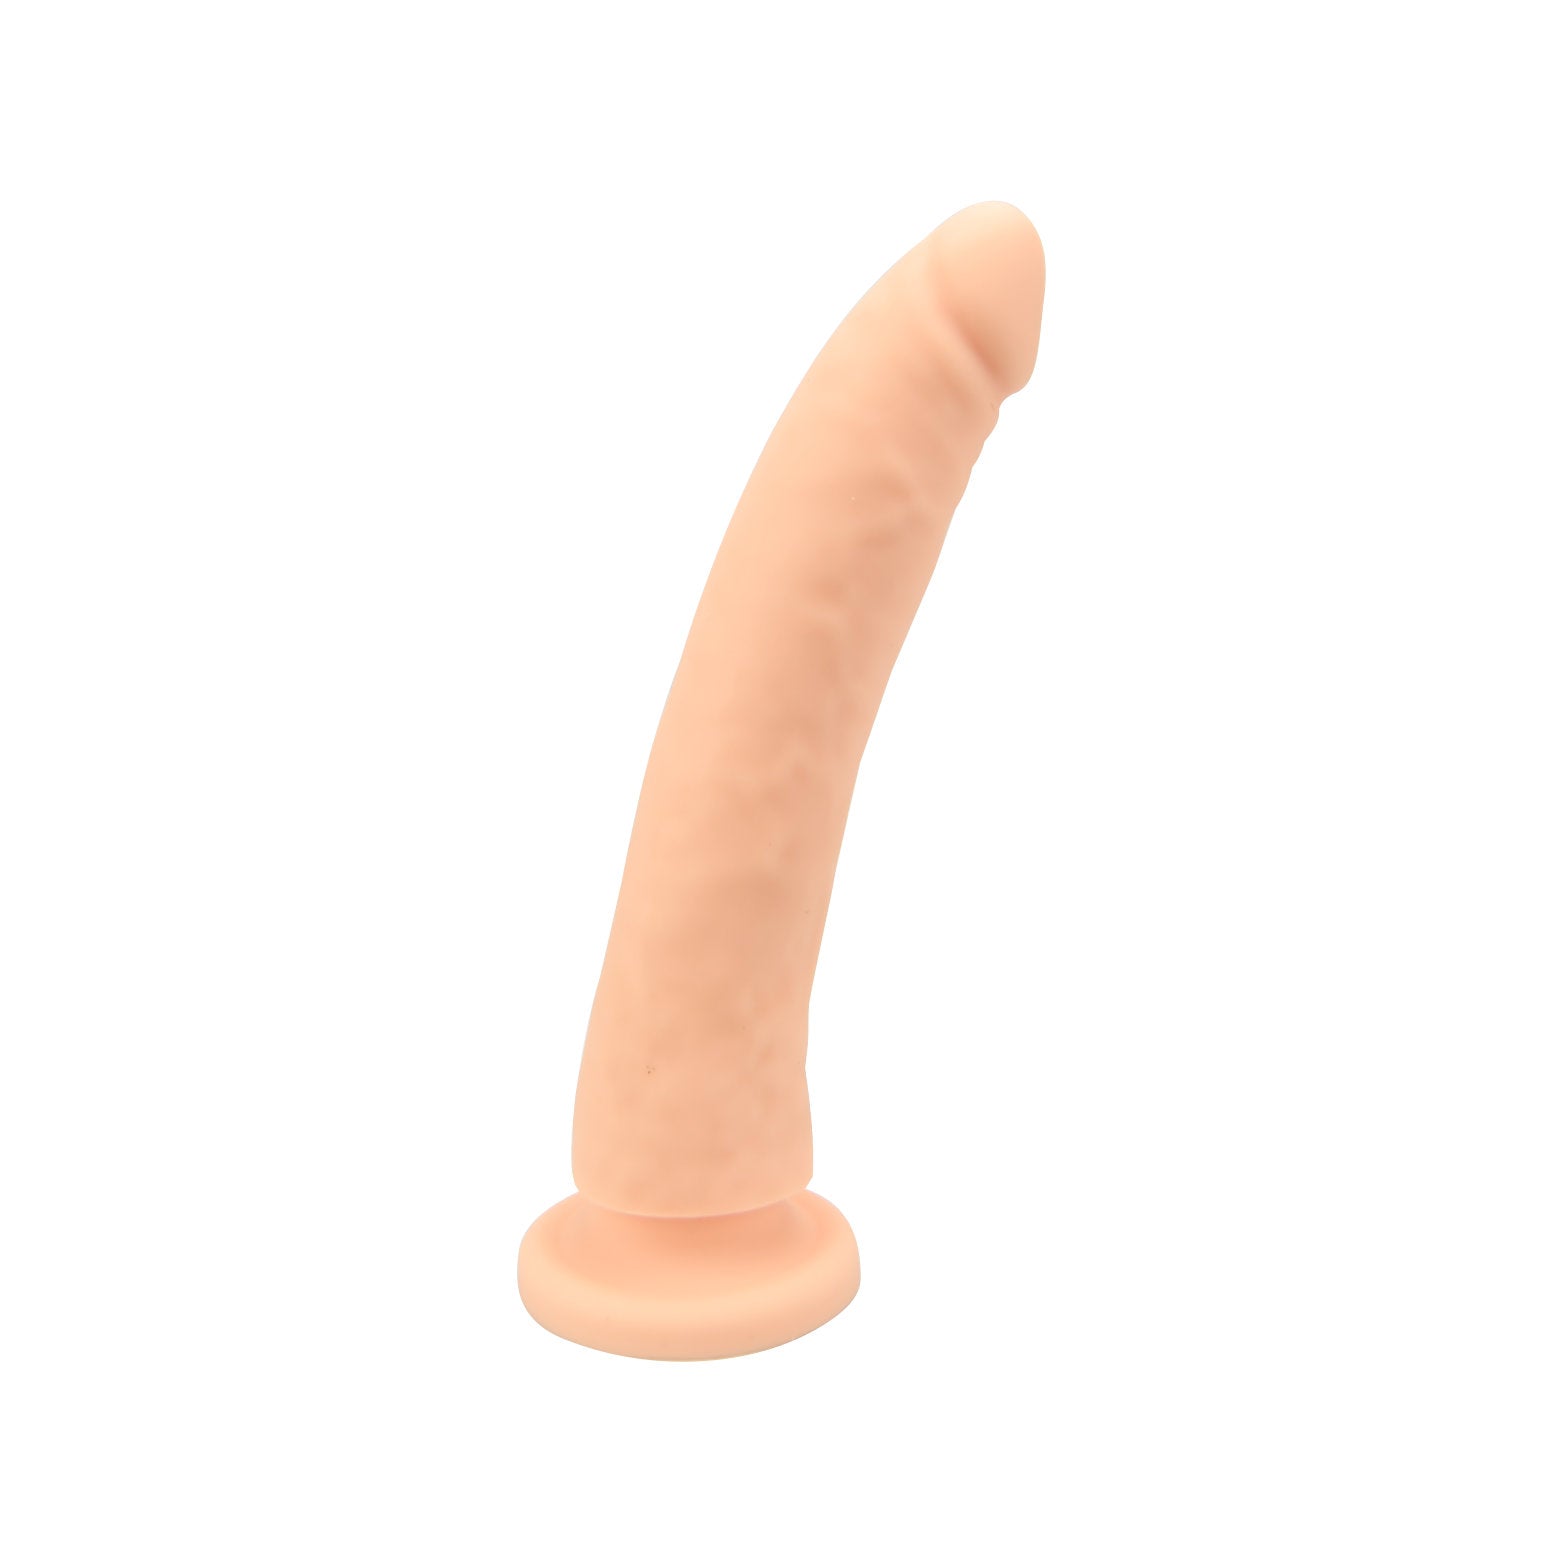 Vibrators, Sex Toy Kits and Sex Toys at Cloud9Adults - Loving Joy Realistic Silicone 7.5 Inch Strap-On Dildo - Buy Sex Toys Online